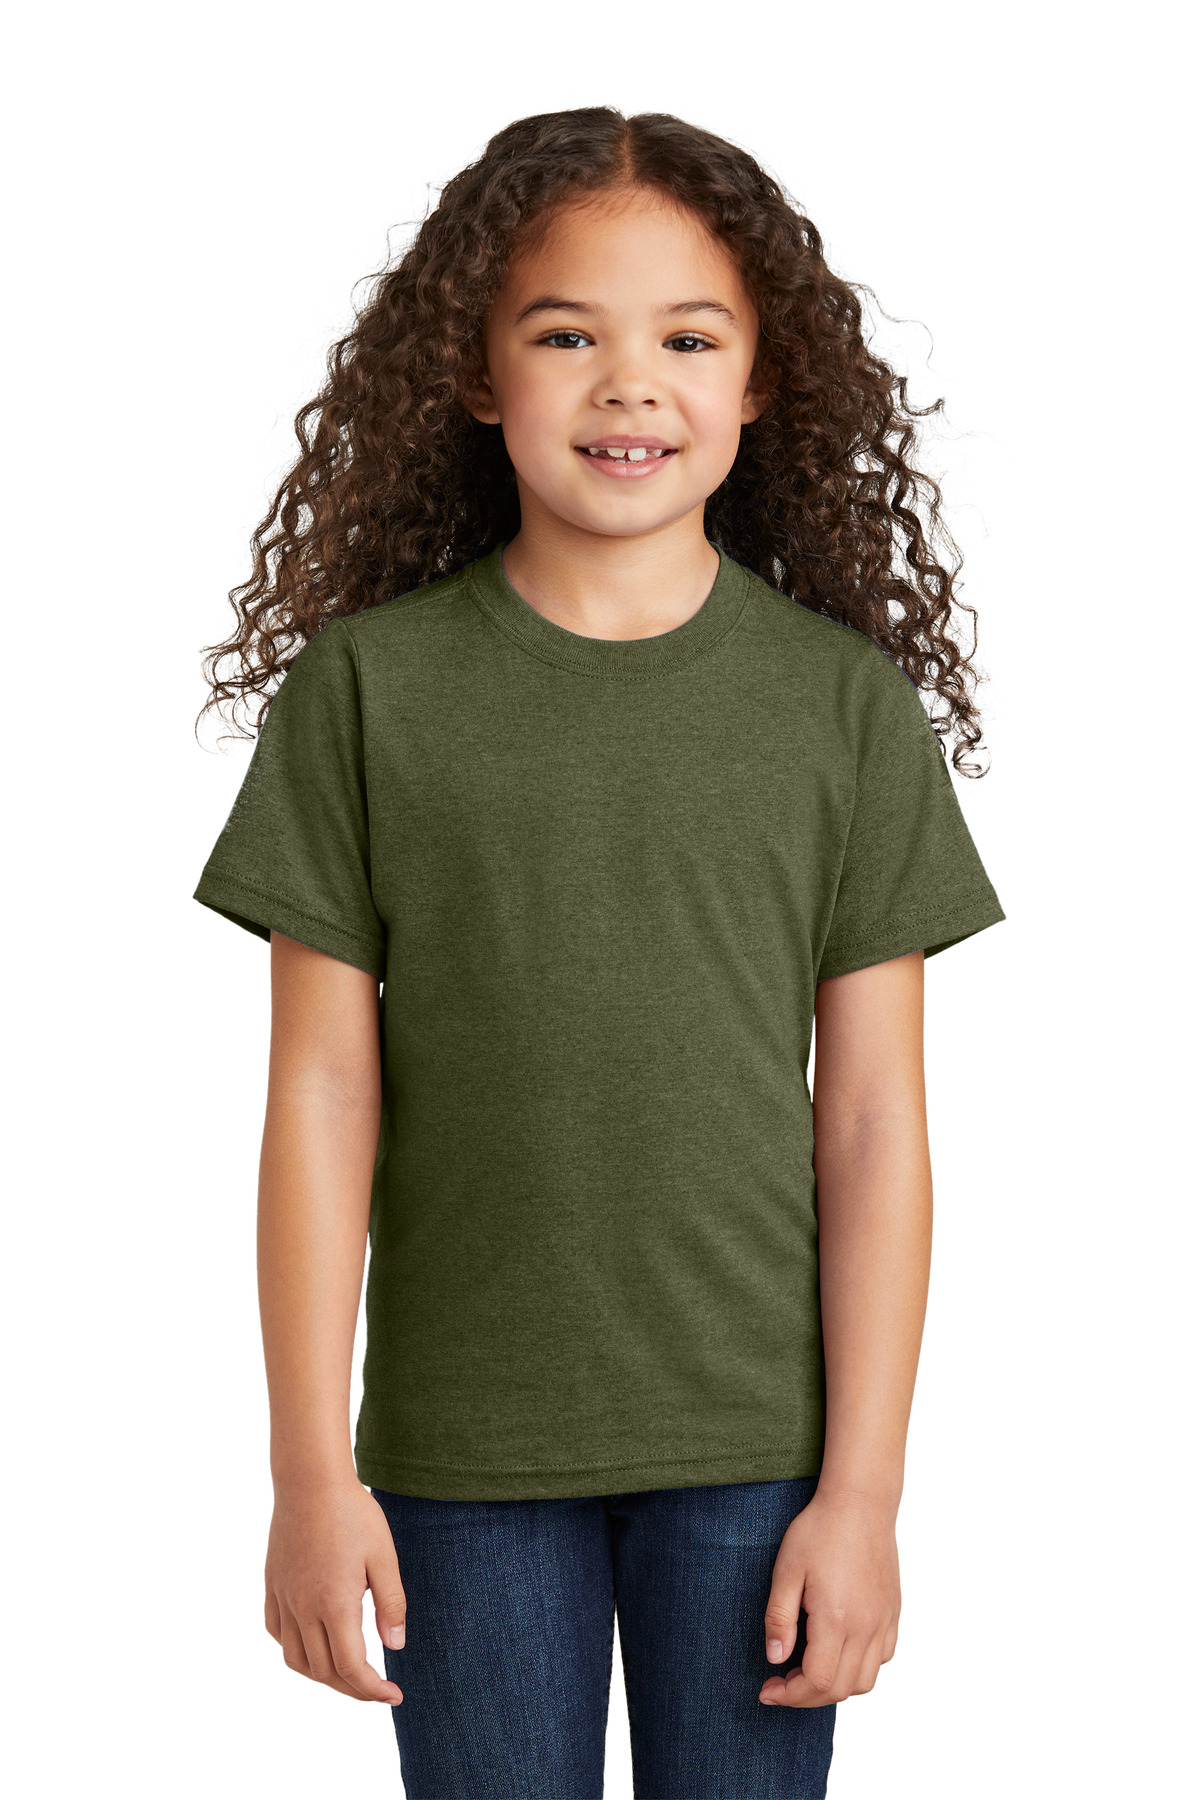 click to view Military Green Heather